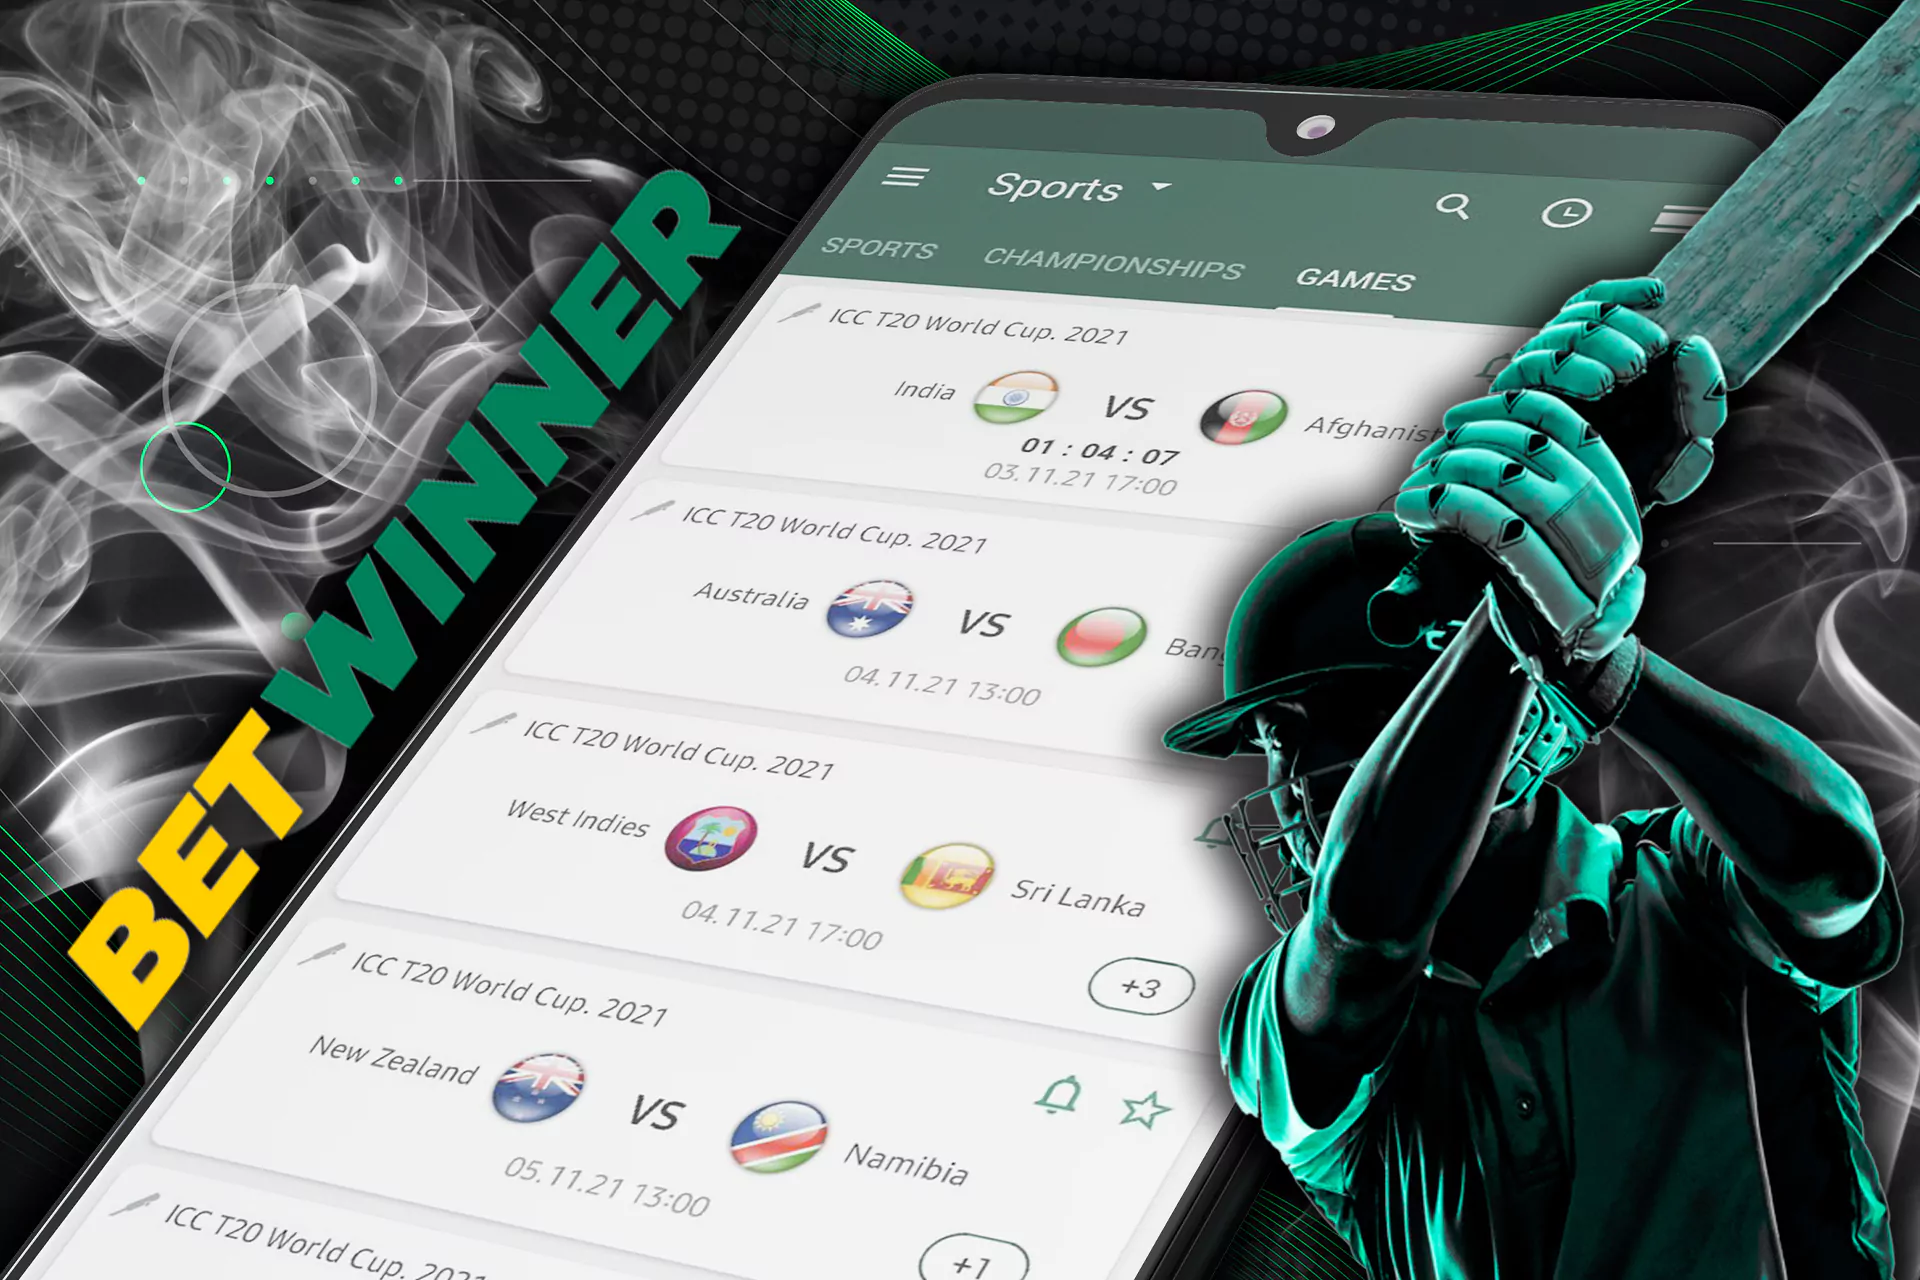 Registaer at Betwinner and place bets on cricket.